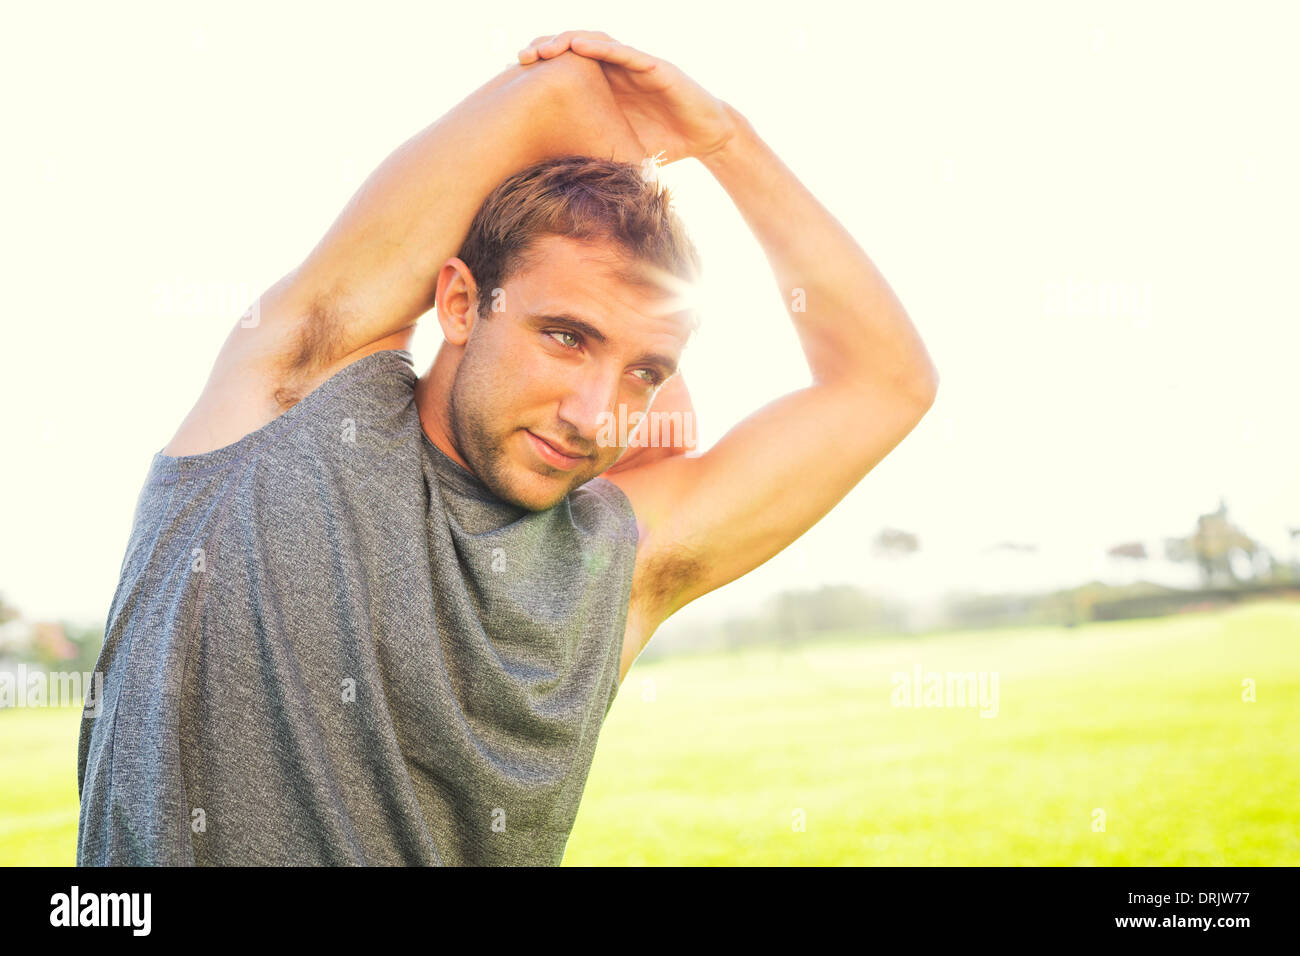 Attractive fit young man stretching before exercise workout, sunrise early morning backlit. Healthy sports fitness concept. Stock Photo